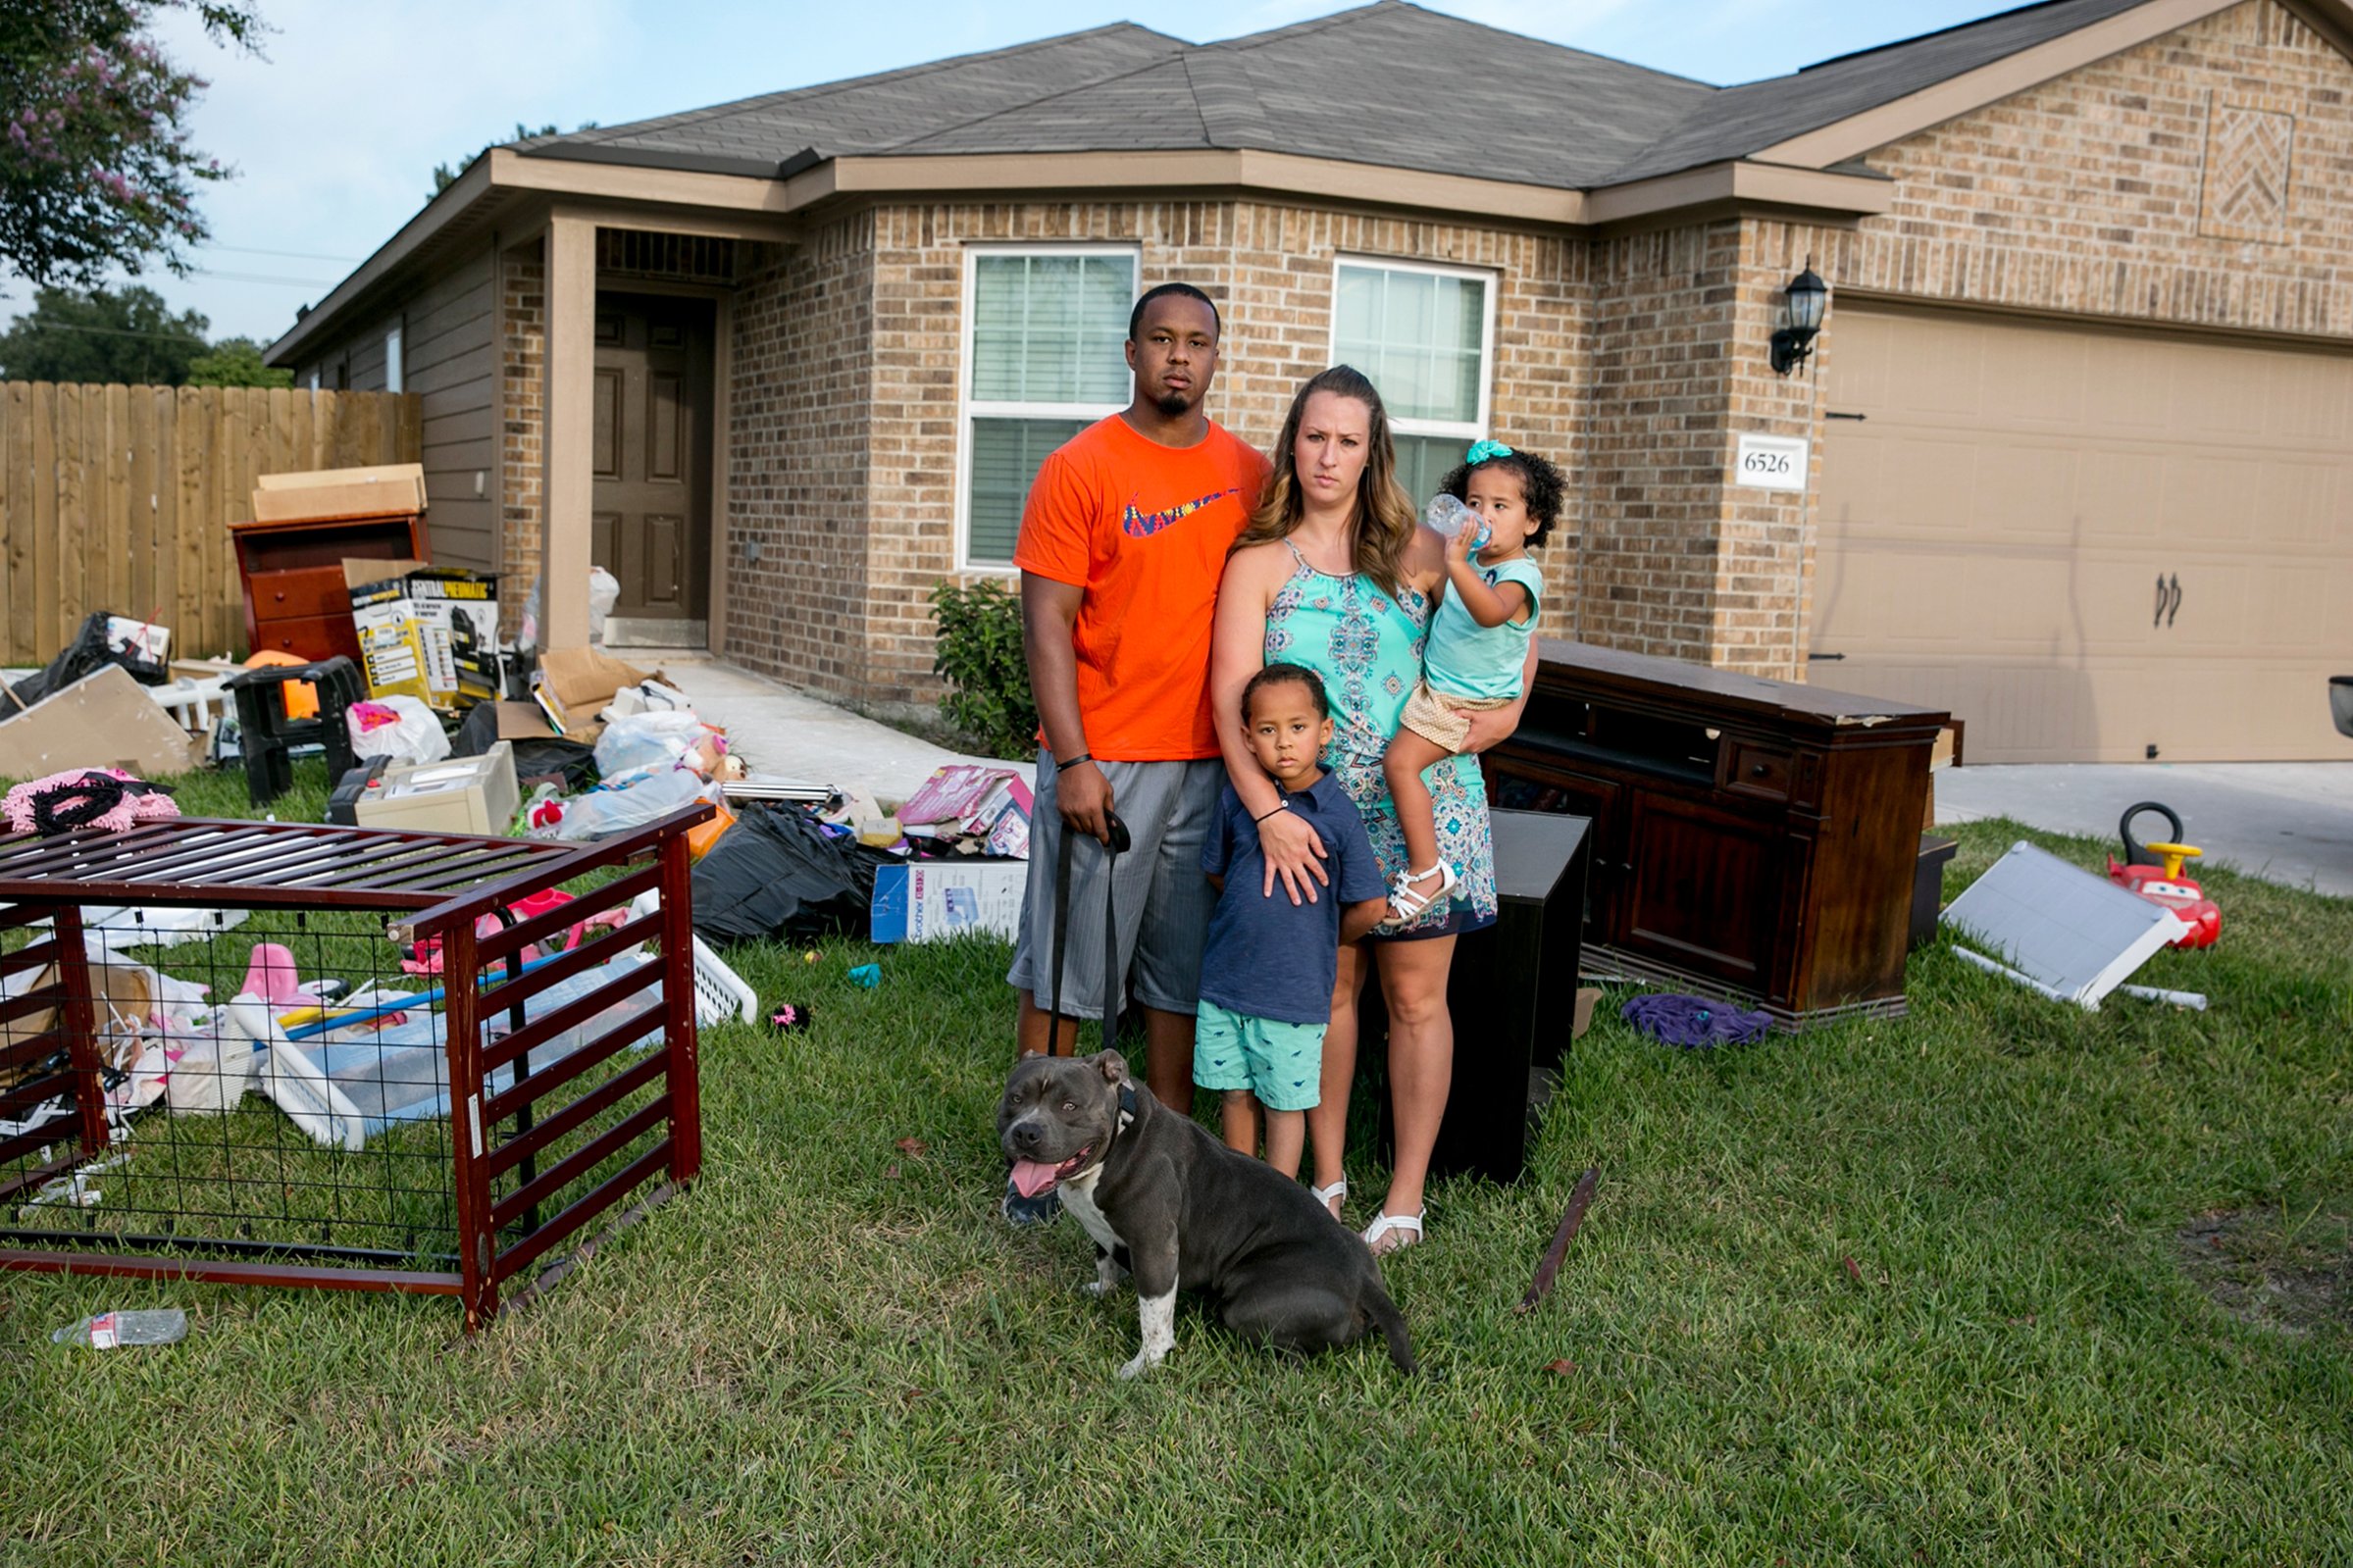 Isiah Courtney stands in the front yard of his Houston home with his wife, Danielle, son Bryson, daughter Aubree and dog Bruce